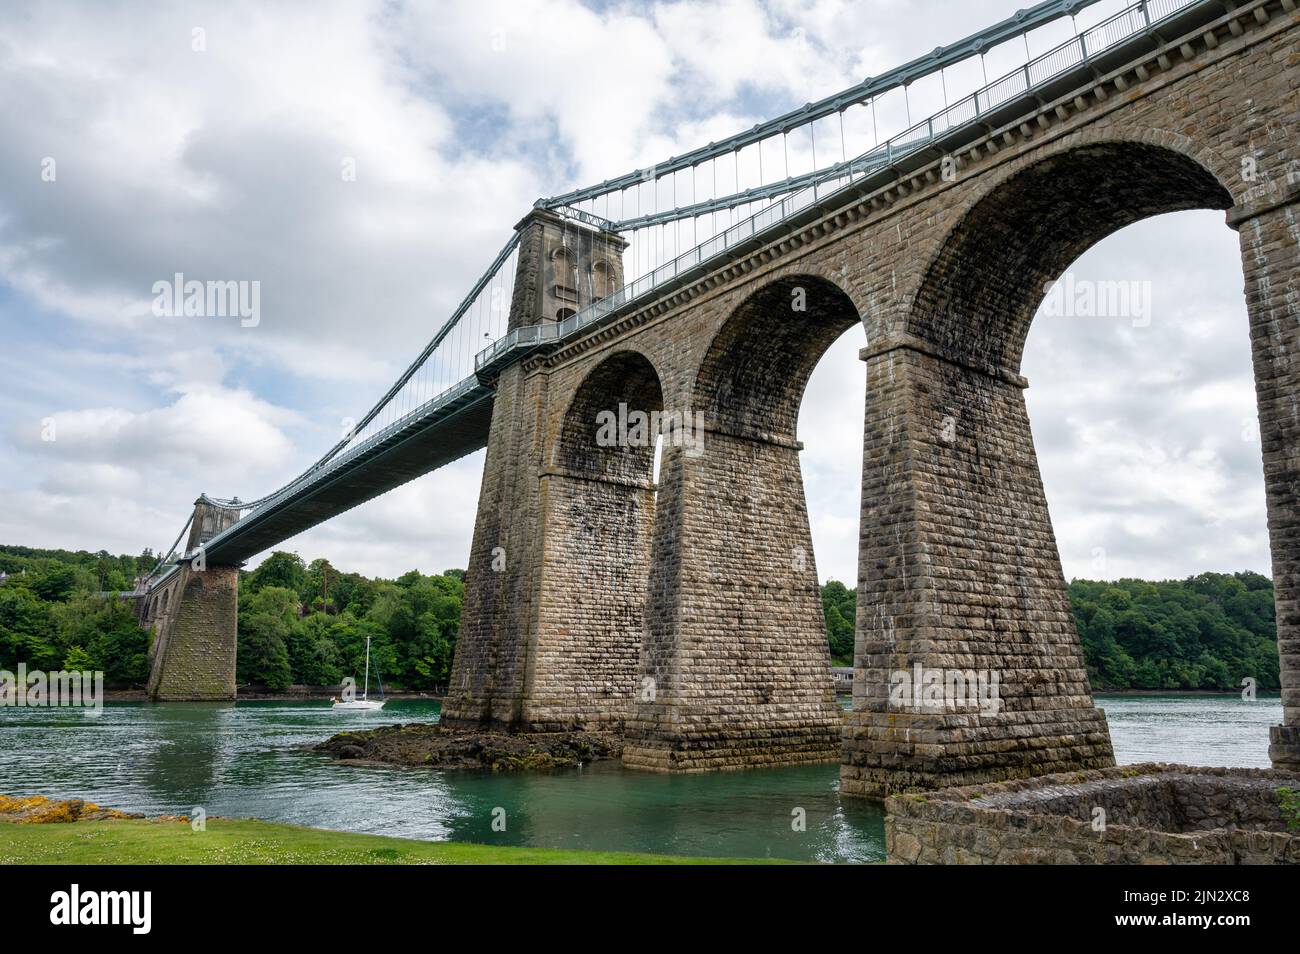 Menai Suspension Bridge built by Thomas Telford that connects the Island of Anglesey to mainland Wales Stock Photo